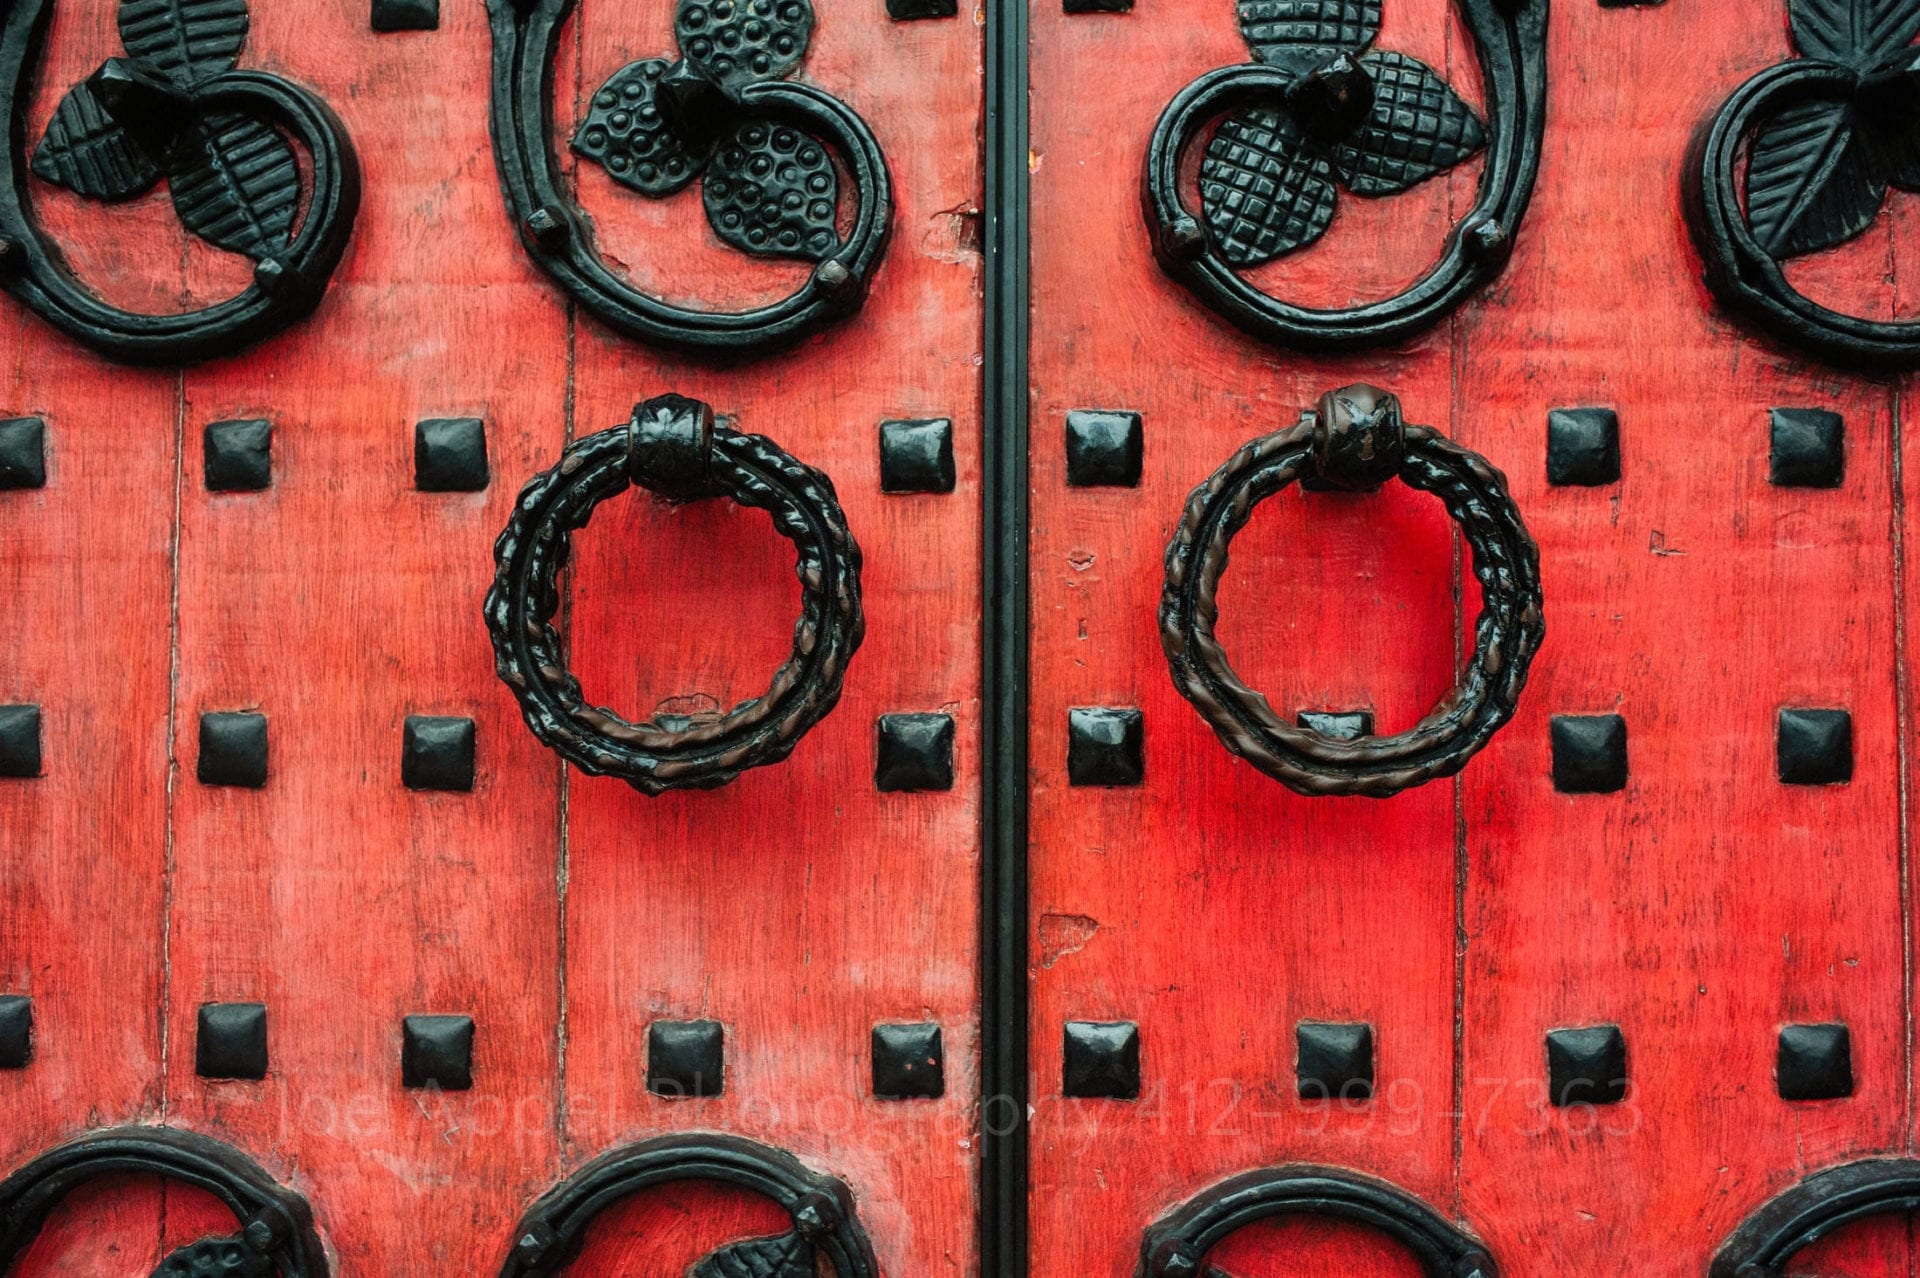 detail photo of the red-painted heavy wooden doors at Heinz Chapel. There are black rivets and fancy ironwork pulls on the door.